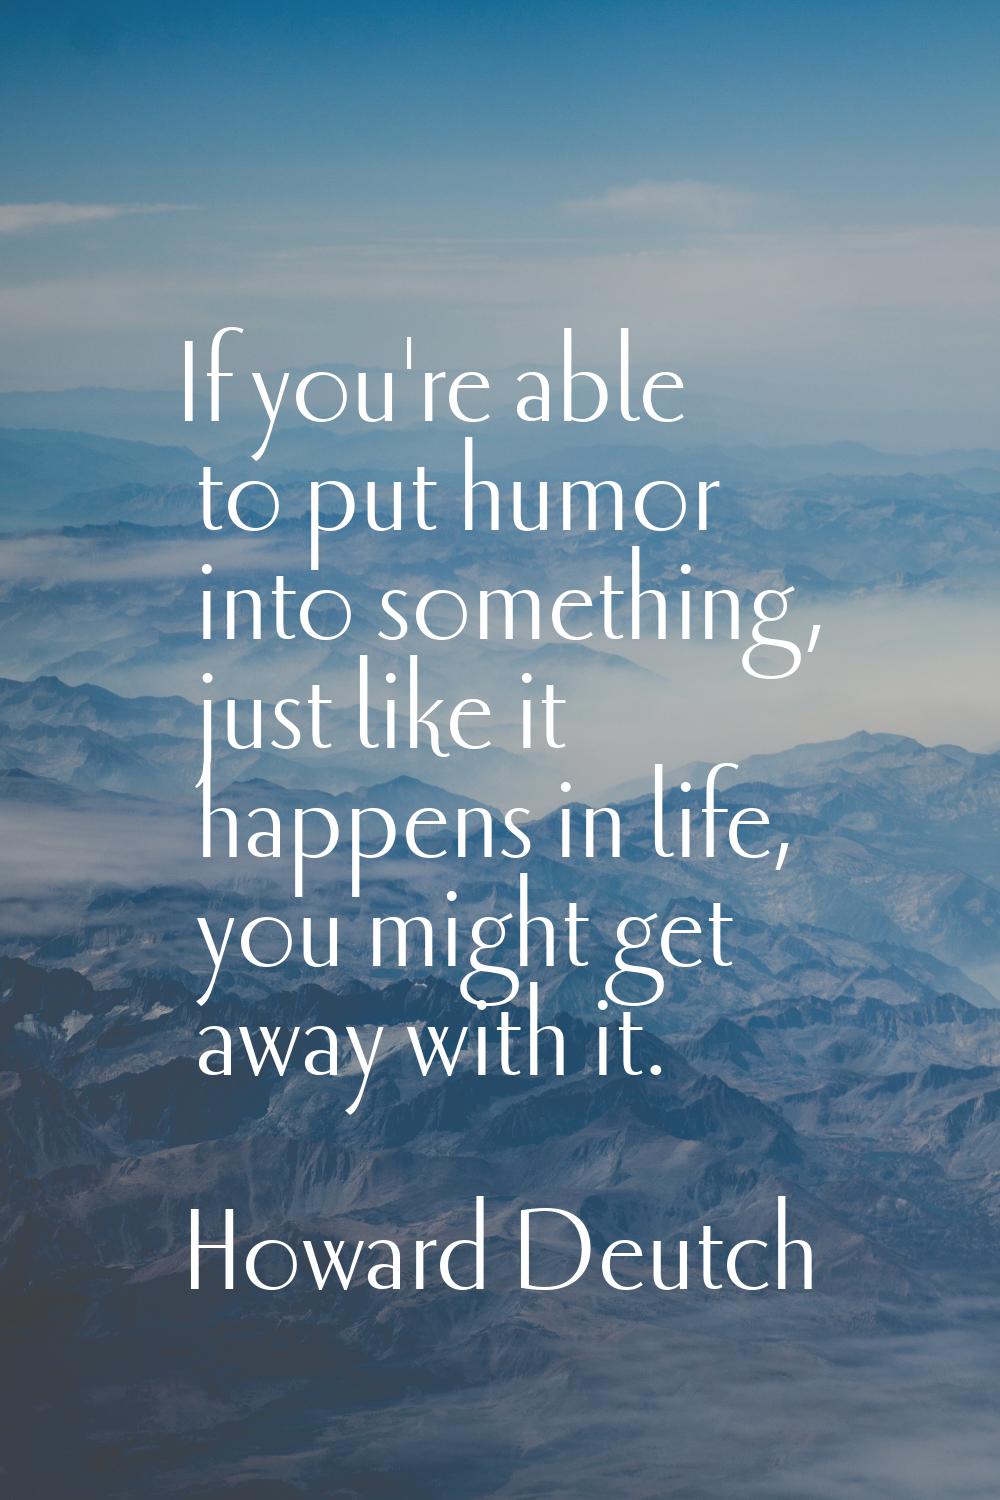 If you're able to put humor into something, just like it happens in life, you might get away with i